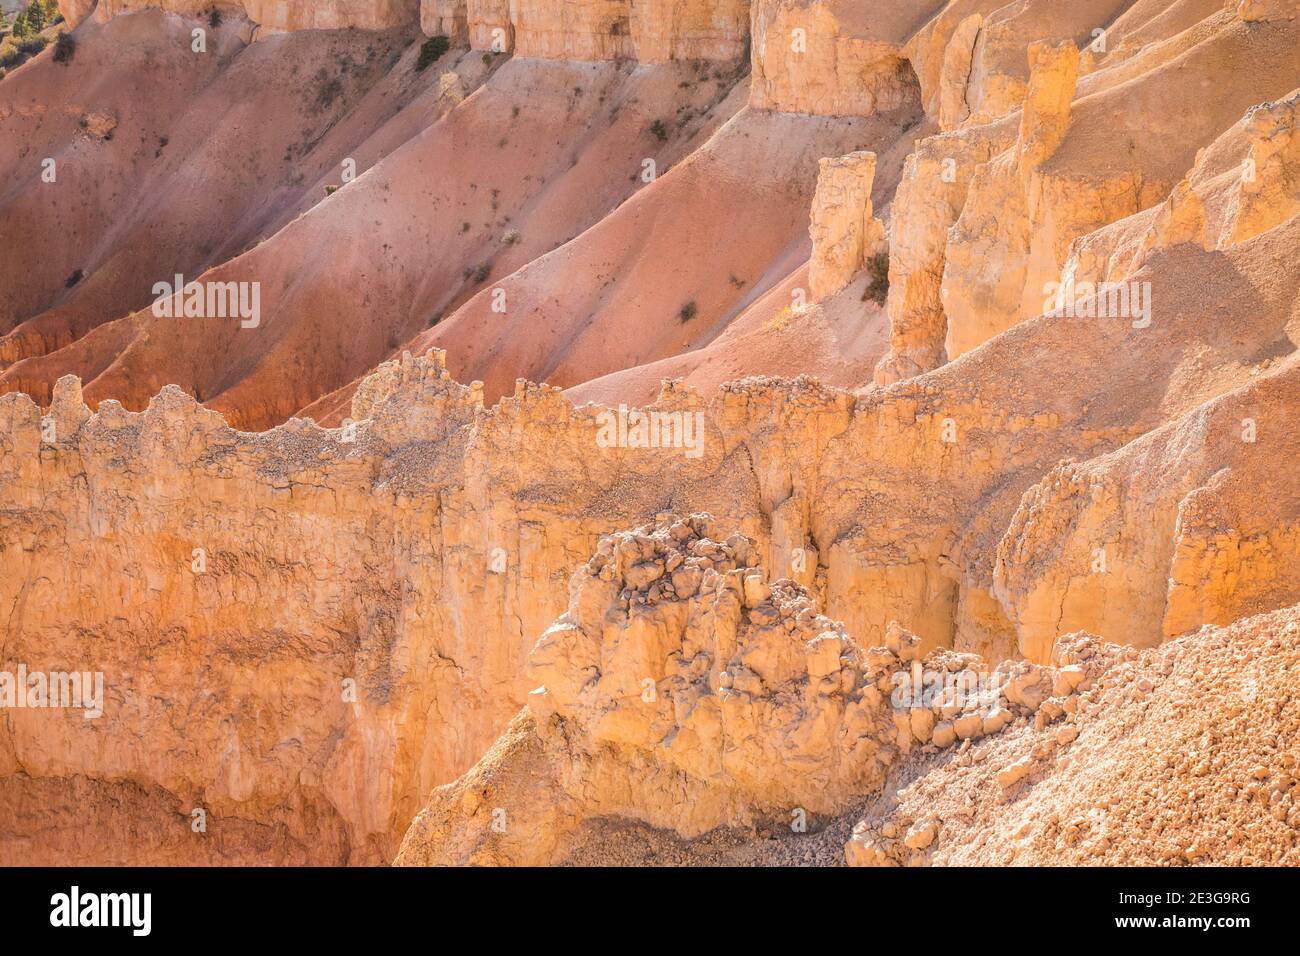 Sloped ridges, gullies and cliffs along the top of Bryce Canyon National Park, Utah, USA. Stock Photo